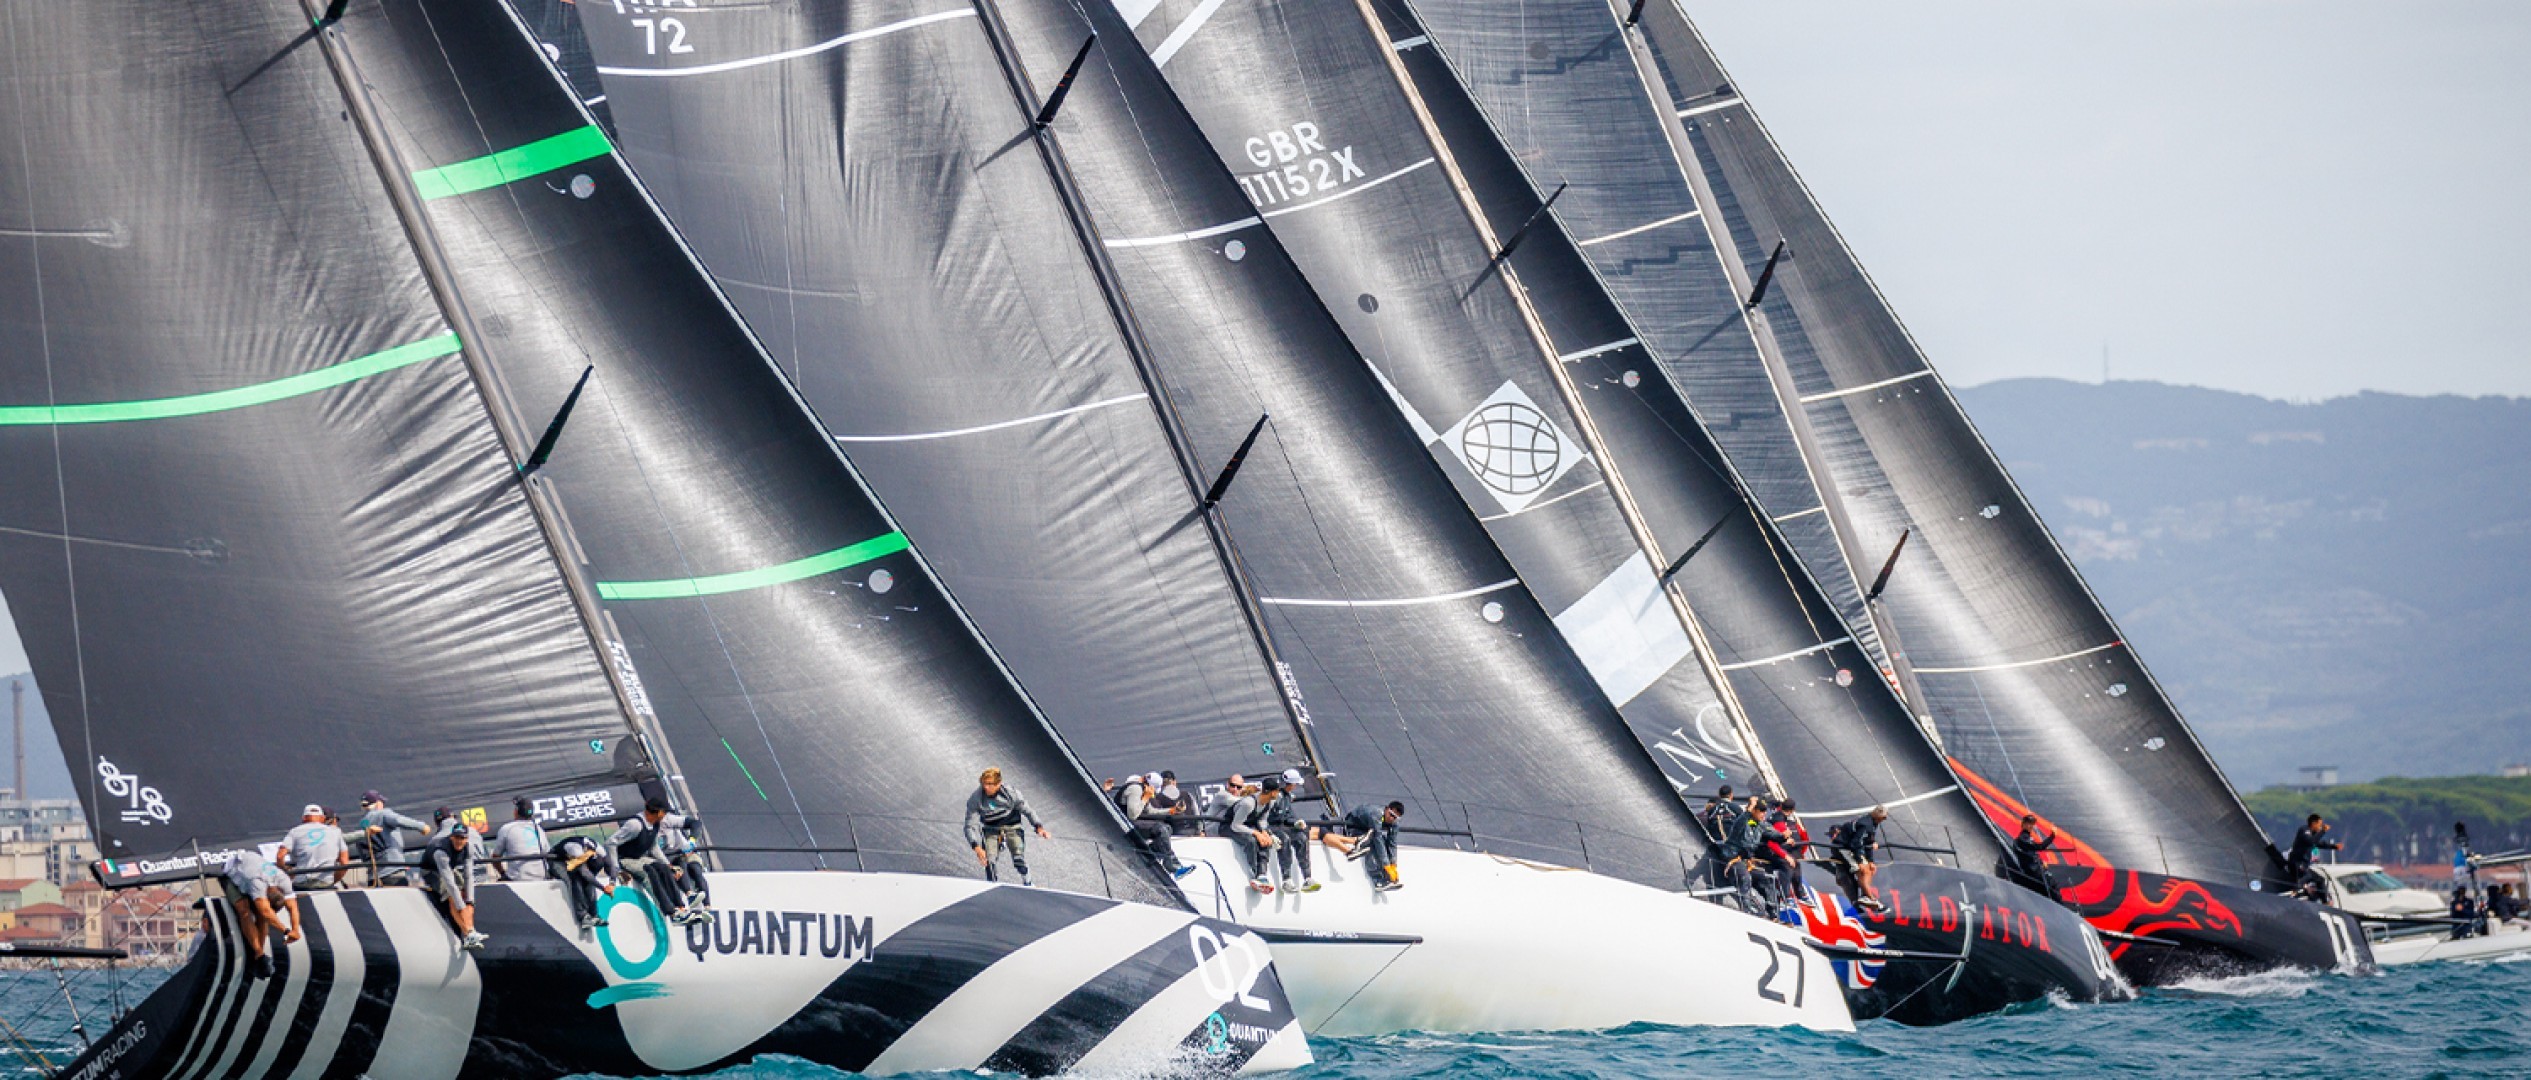 Tied at the top in Tuscany after four races at the Royal Cup 52 Super Series Scarlino